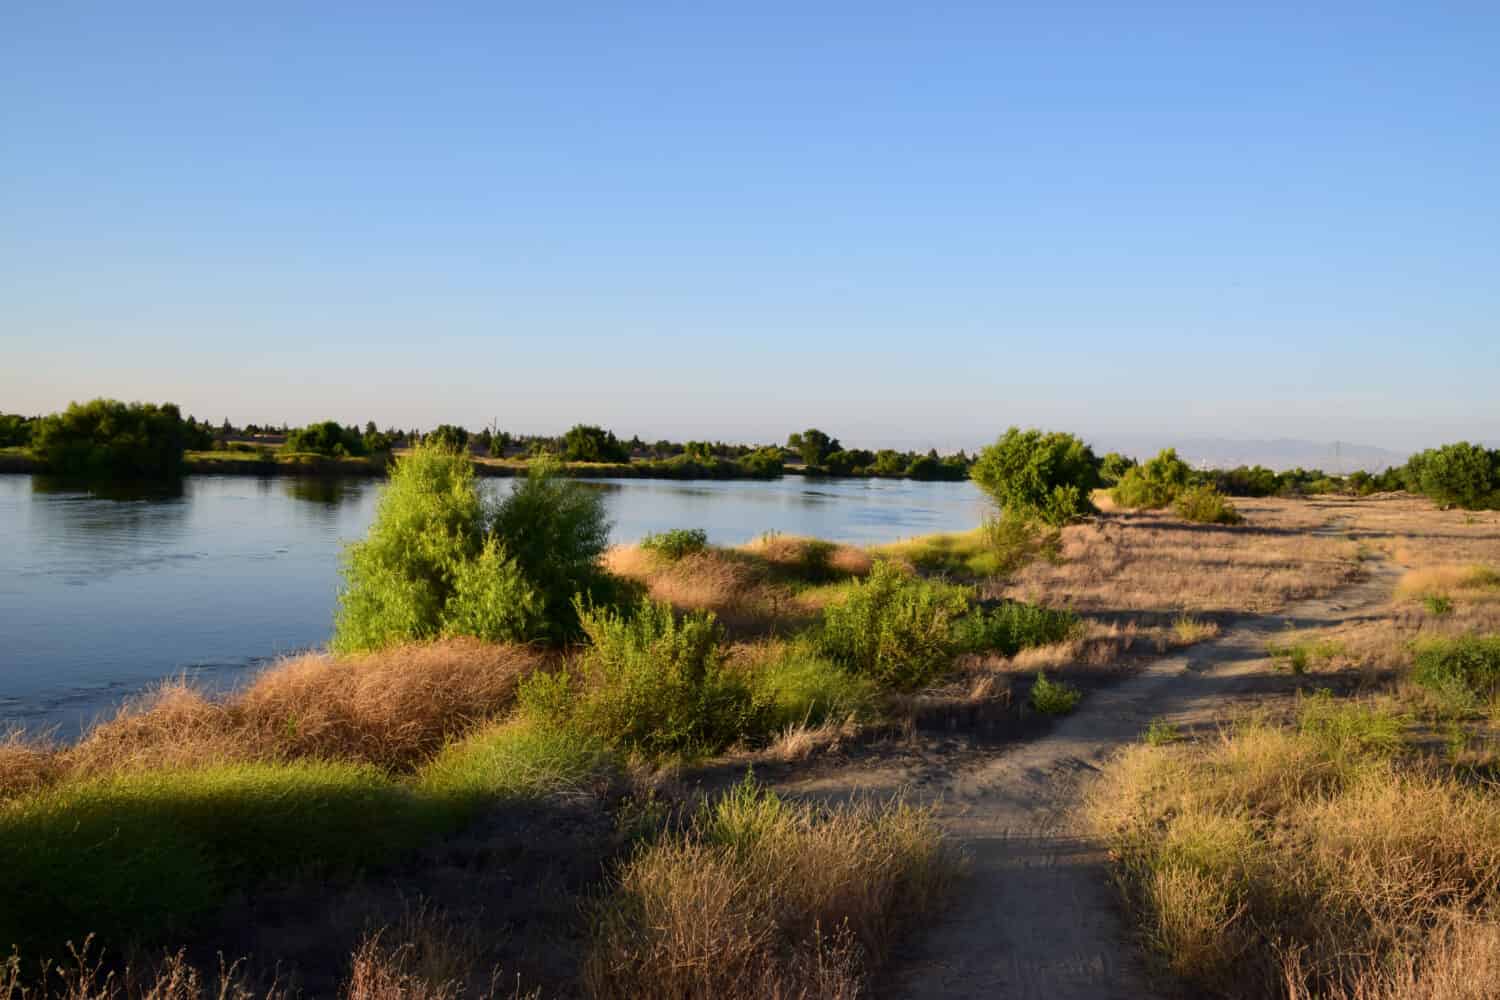 One of the many dirt trails with scenic views along Kern river. Visitors can ride bikes or walk the different trails of Kern River Parkway, Bakersfield, CA. 